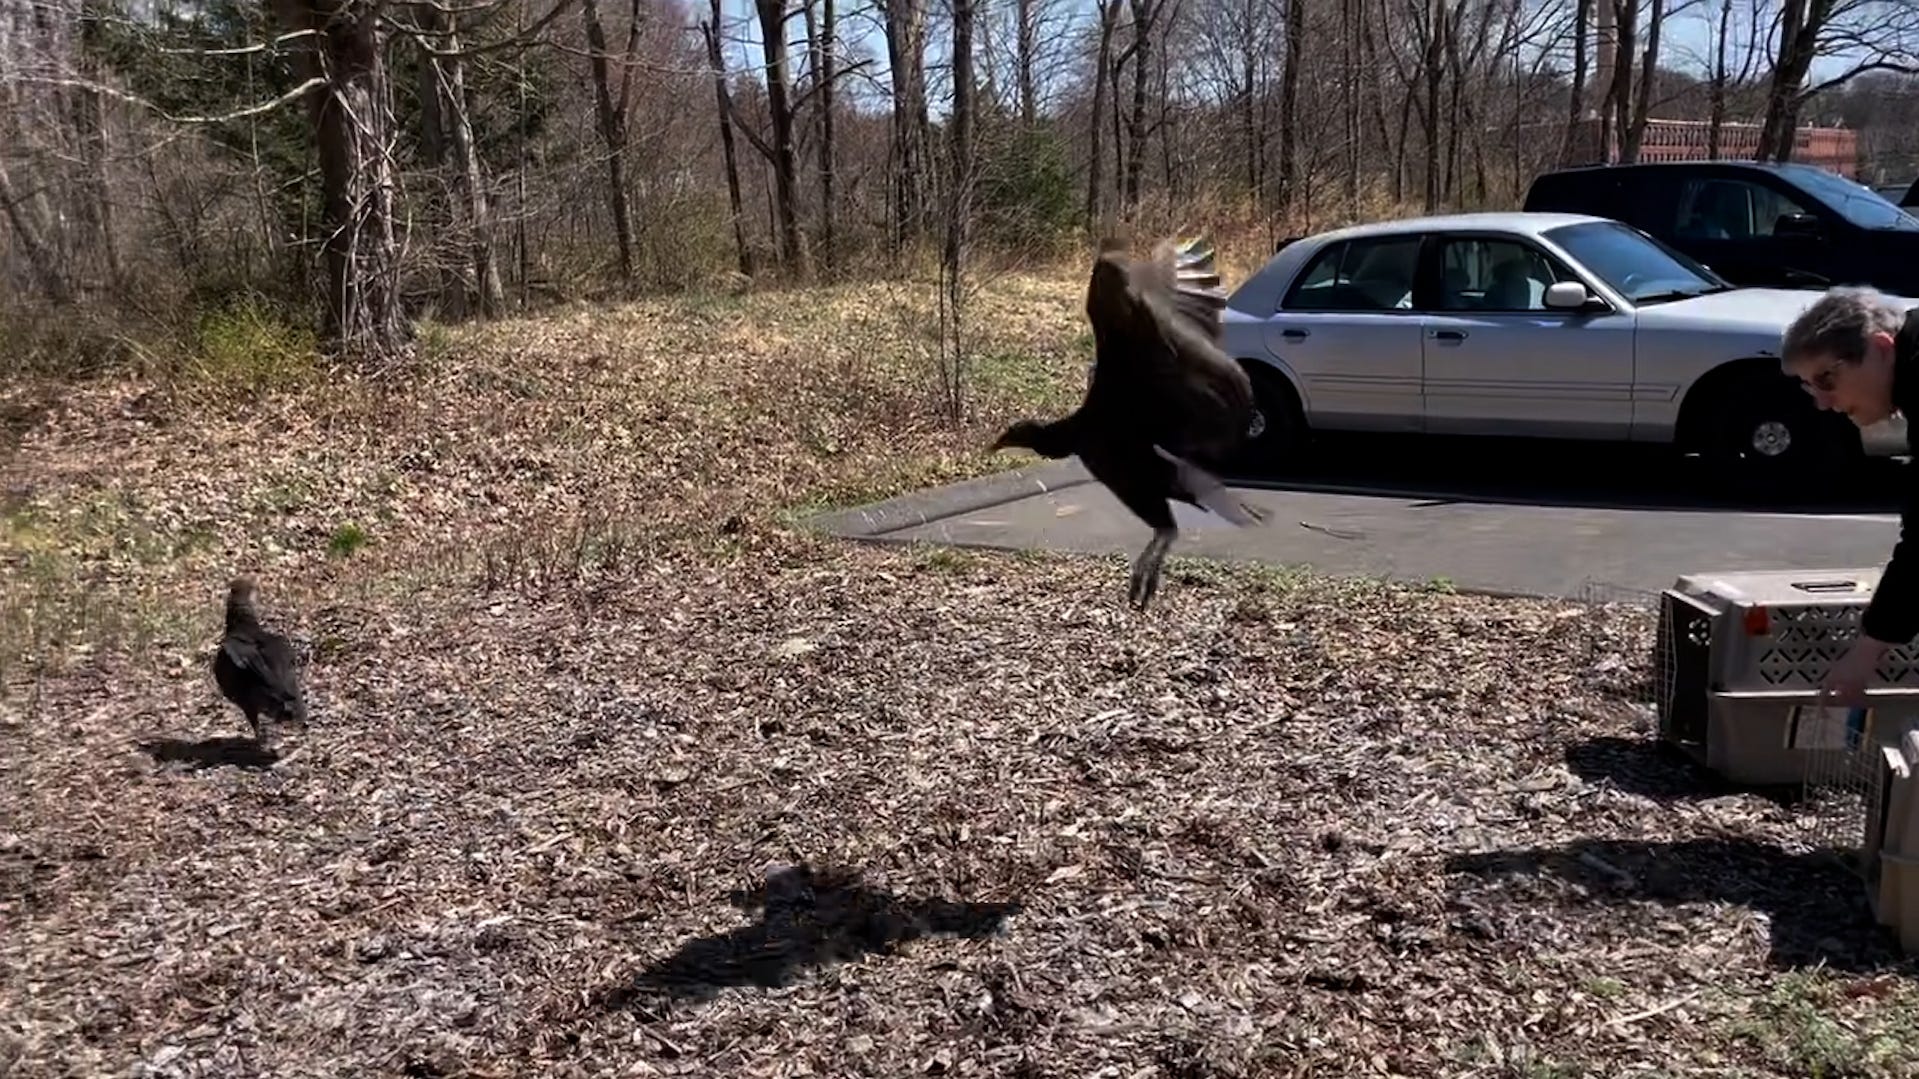 Black vultures, drunk from dumpster diving, return to the wild after sobering up